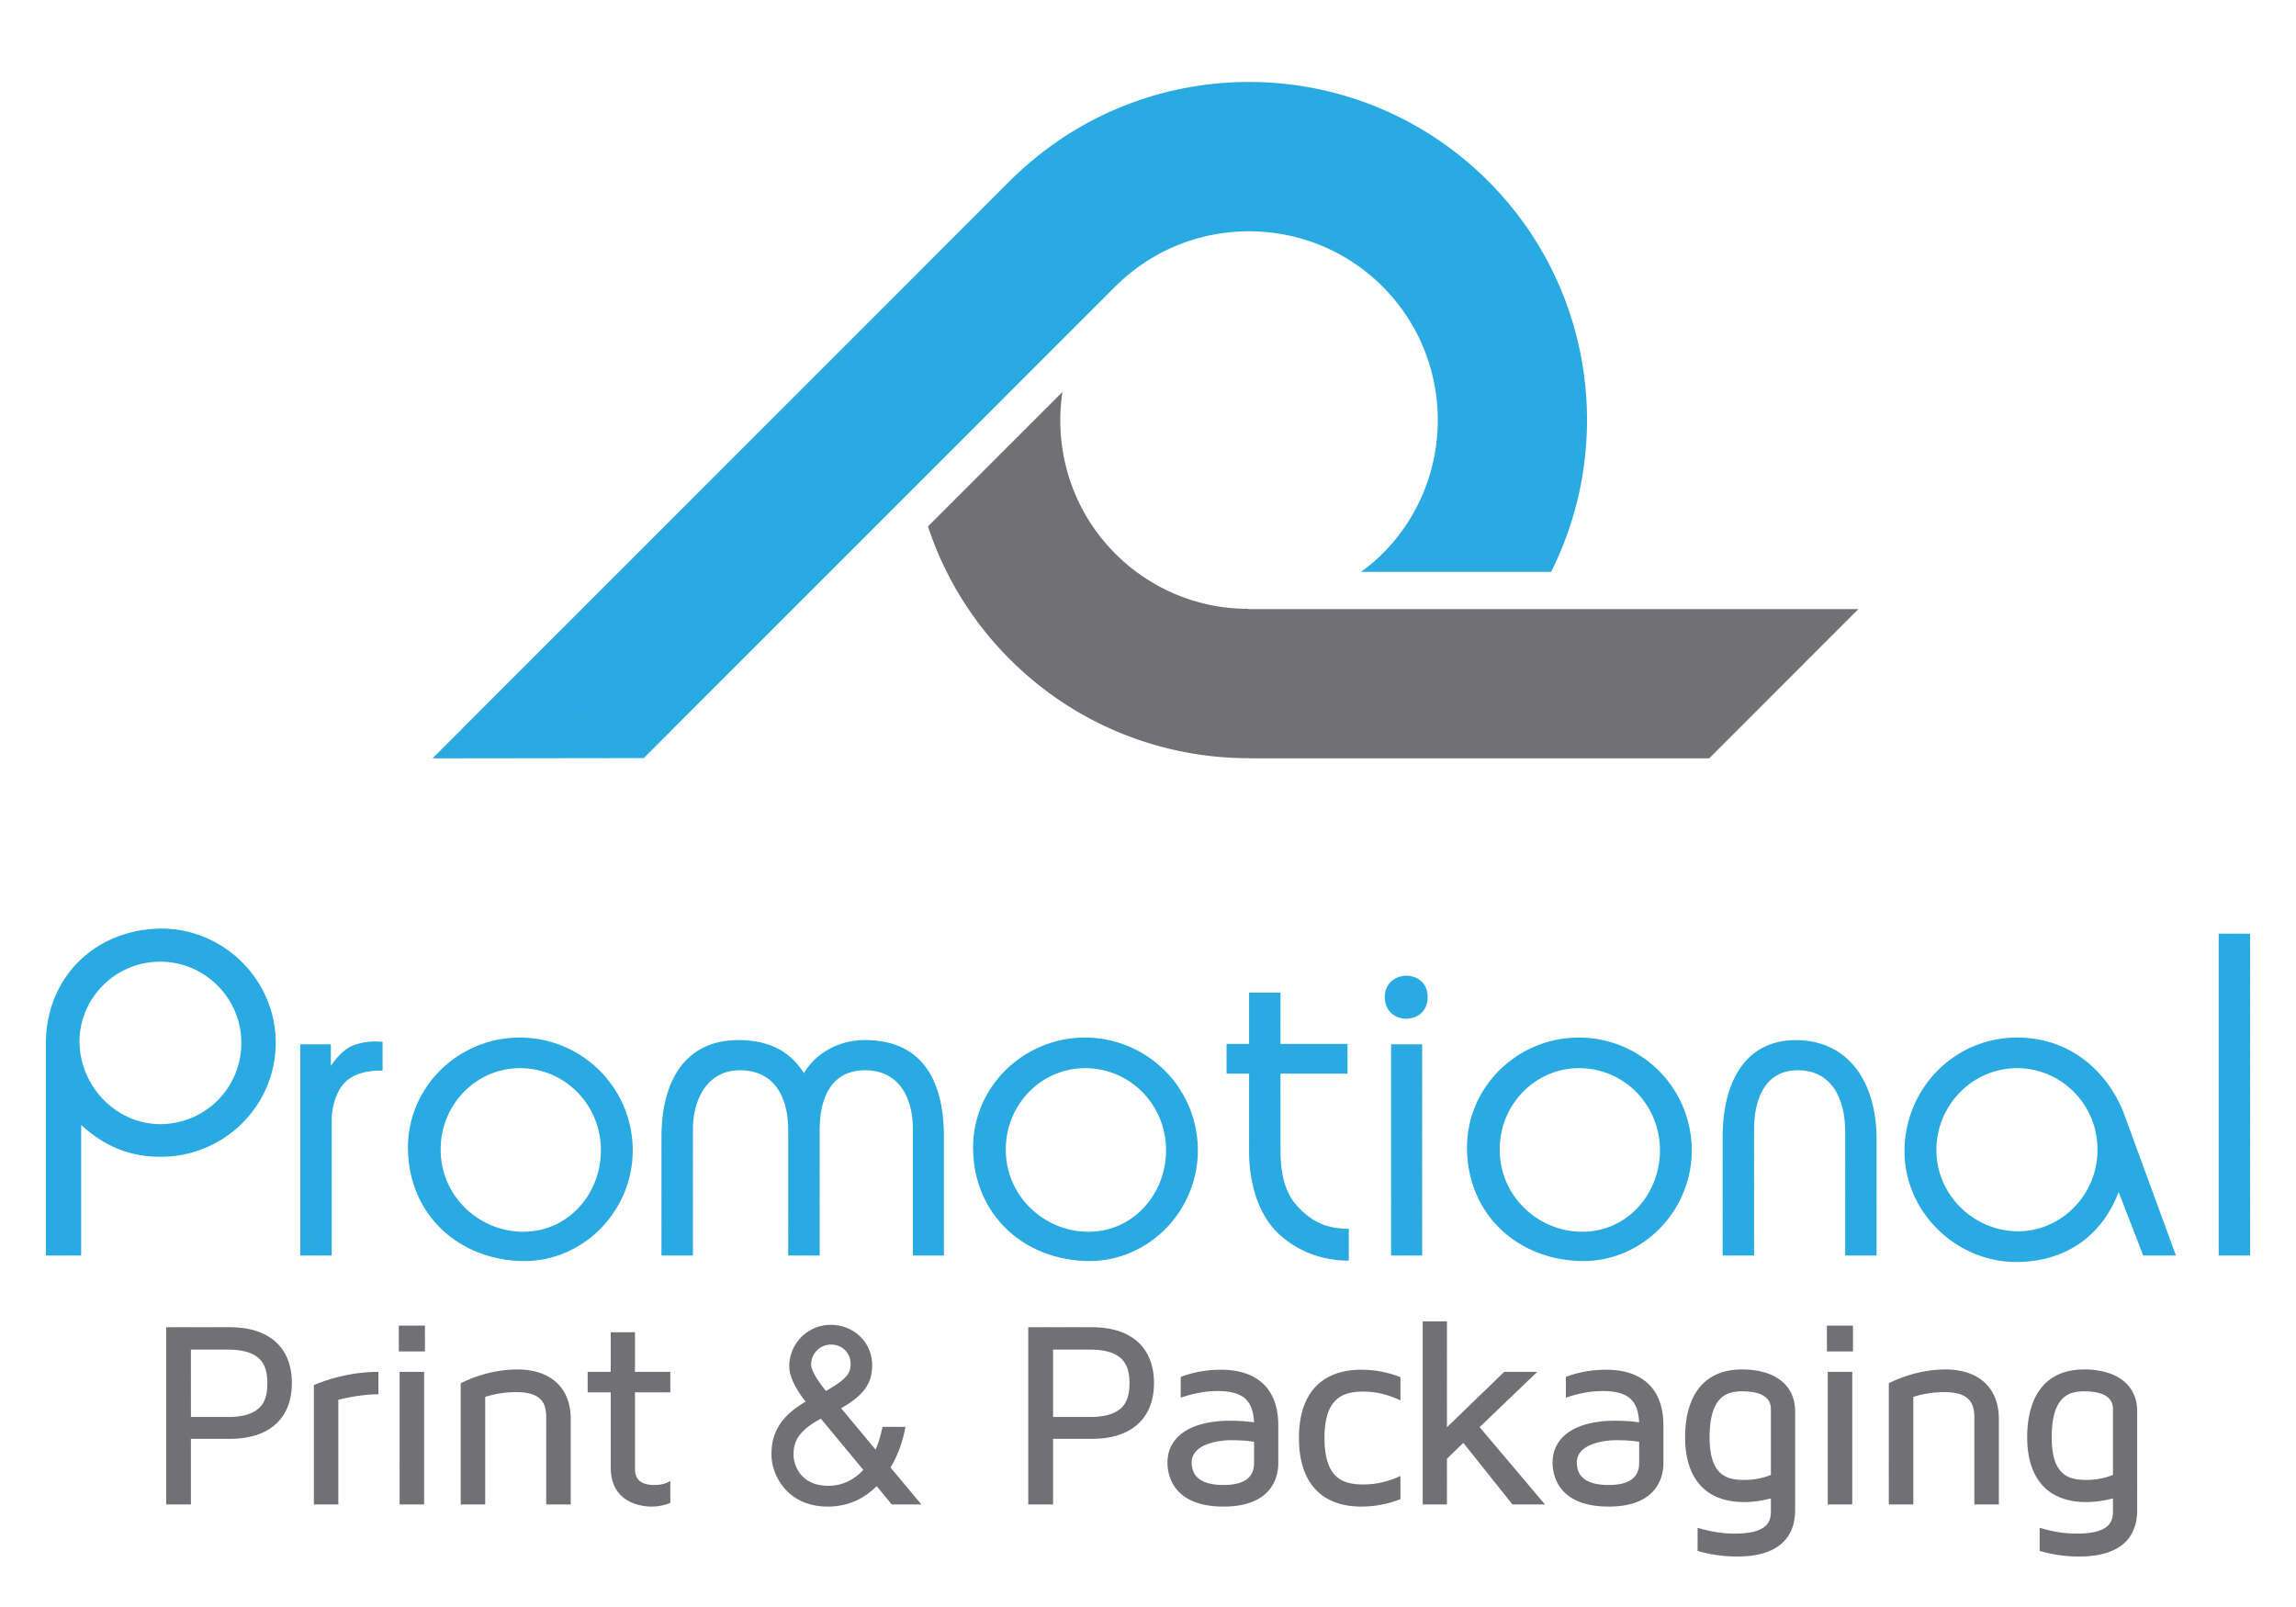 Promotional Print & Packaging 